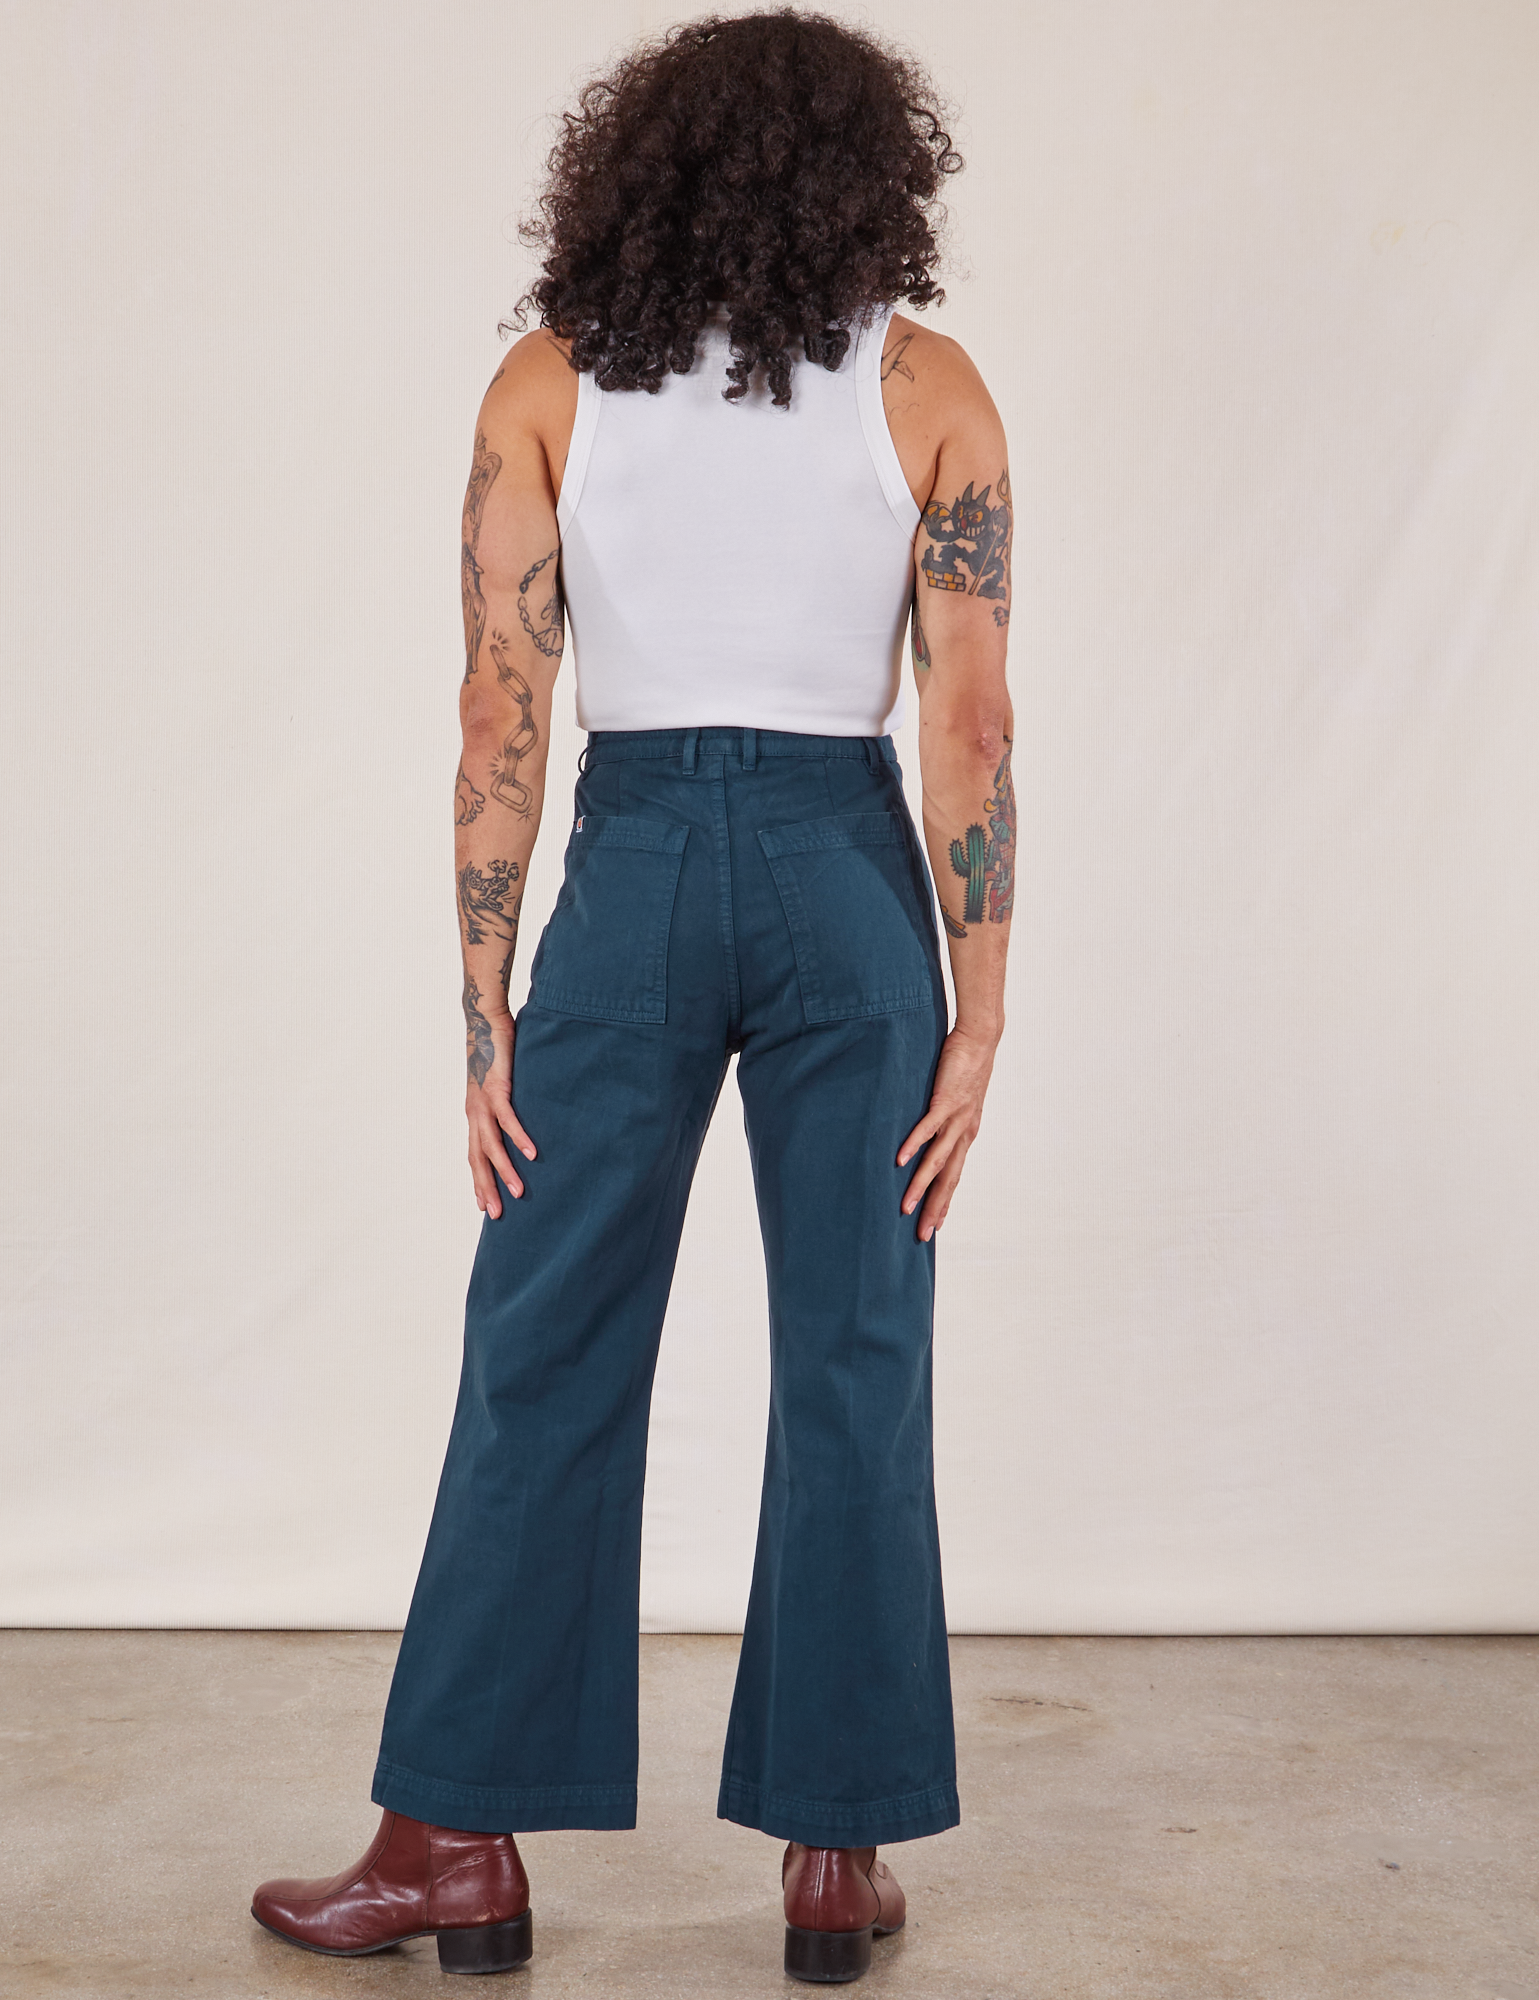 Jesse is wearing Western Pants in Lagoon and vintage tee off-white Cropped Tank